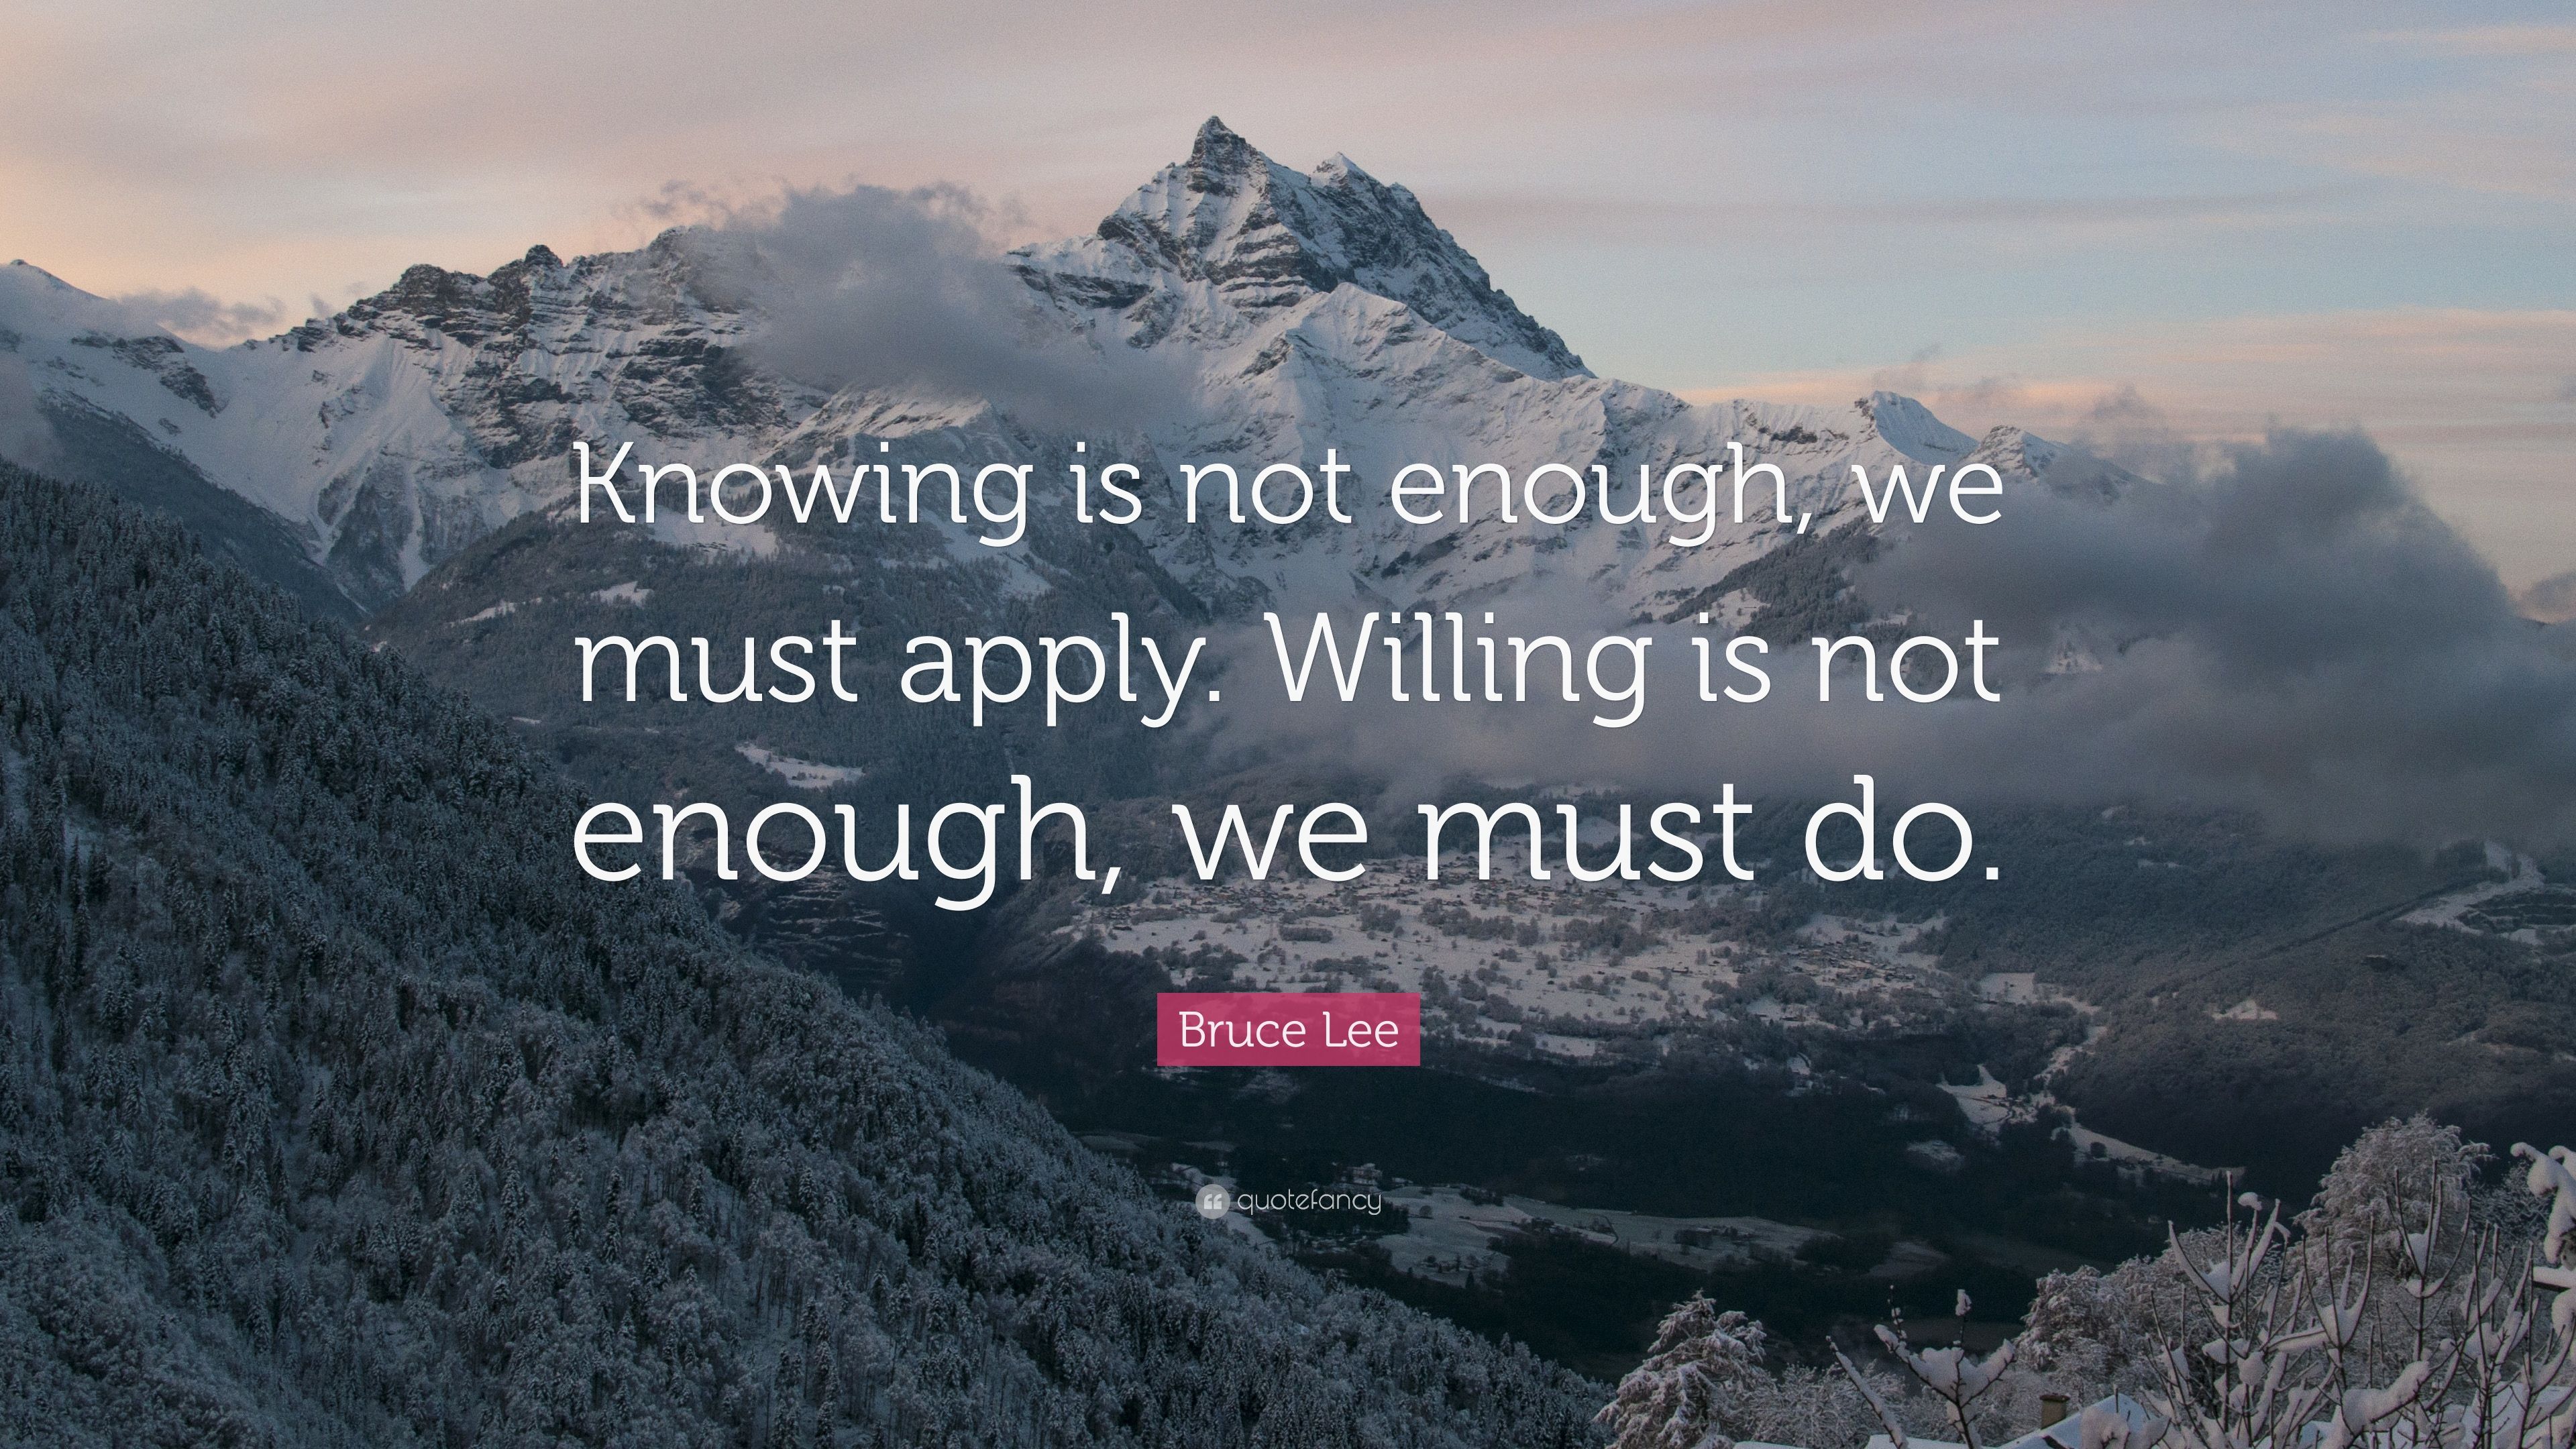 Bruce Lee Quote: “Knowing is not enough, we must apply. Willing is